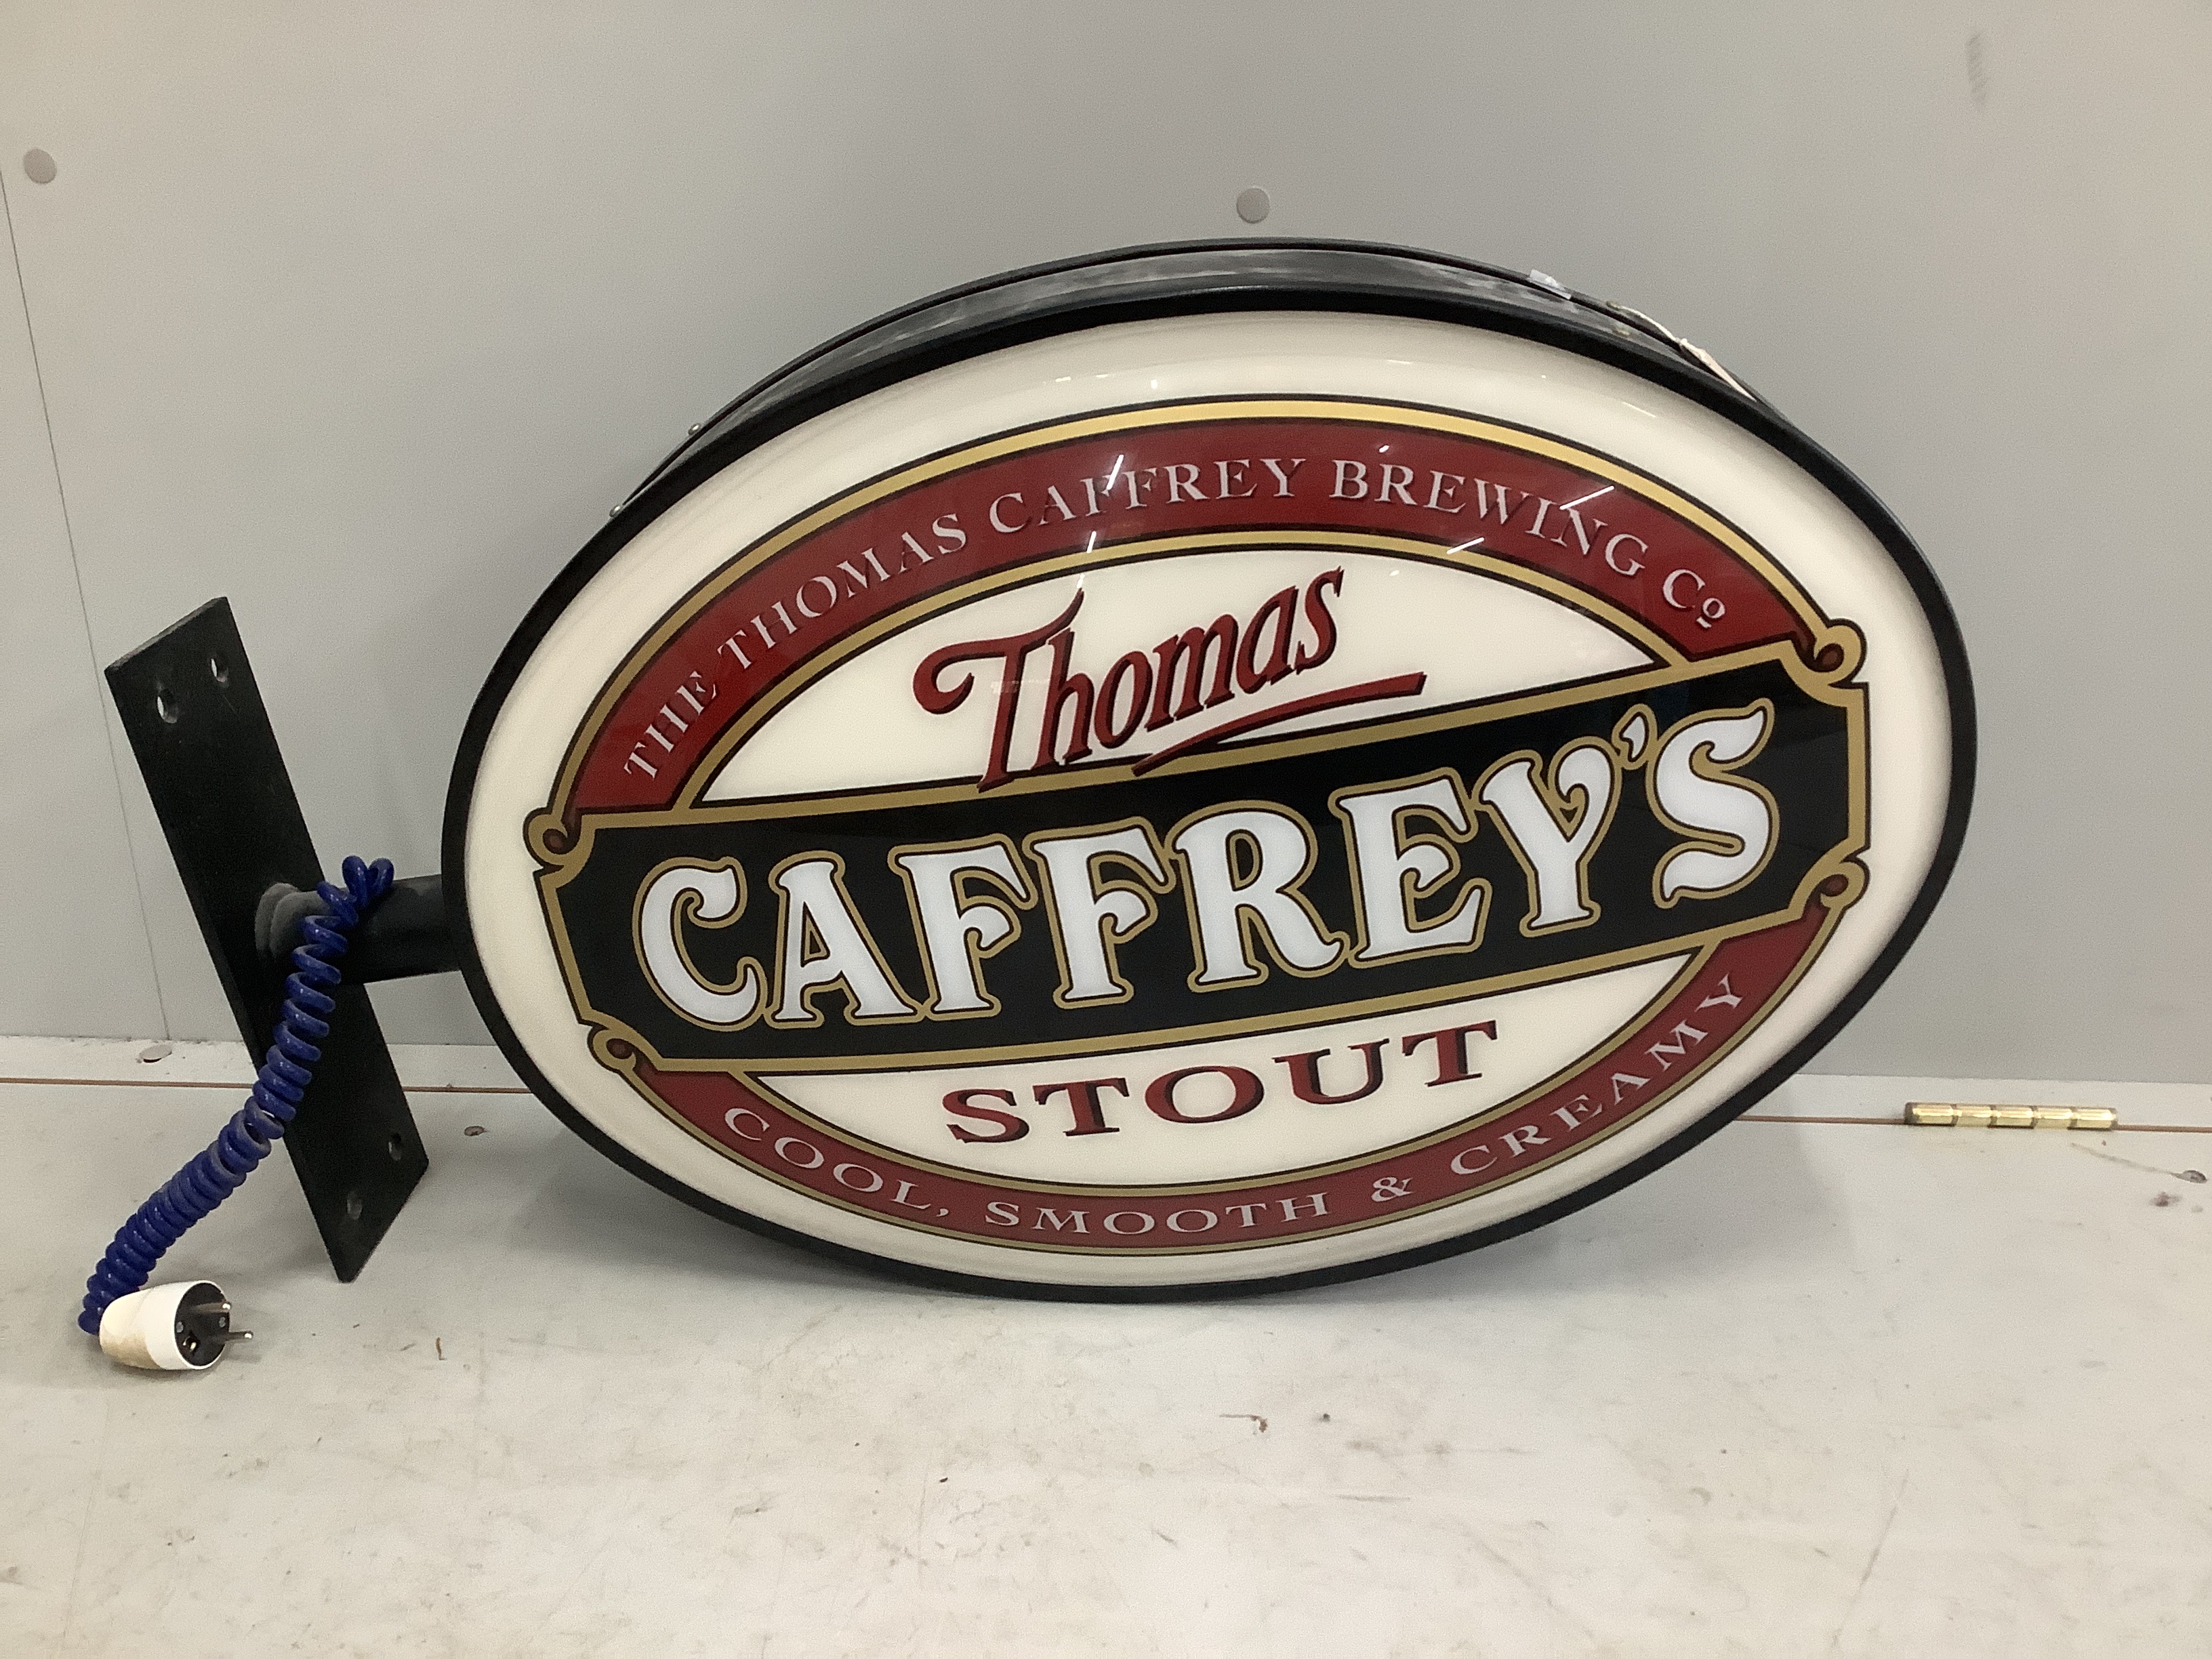 A Caffrey's illuminated double sided pub sign, width with bracket 75cm, height 46cm